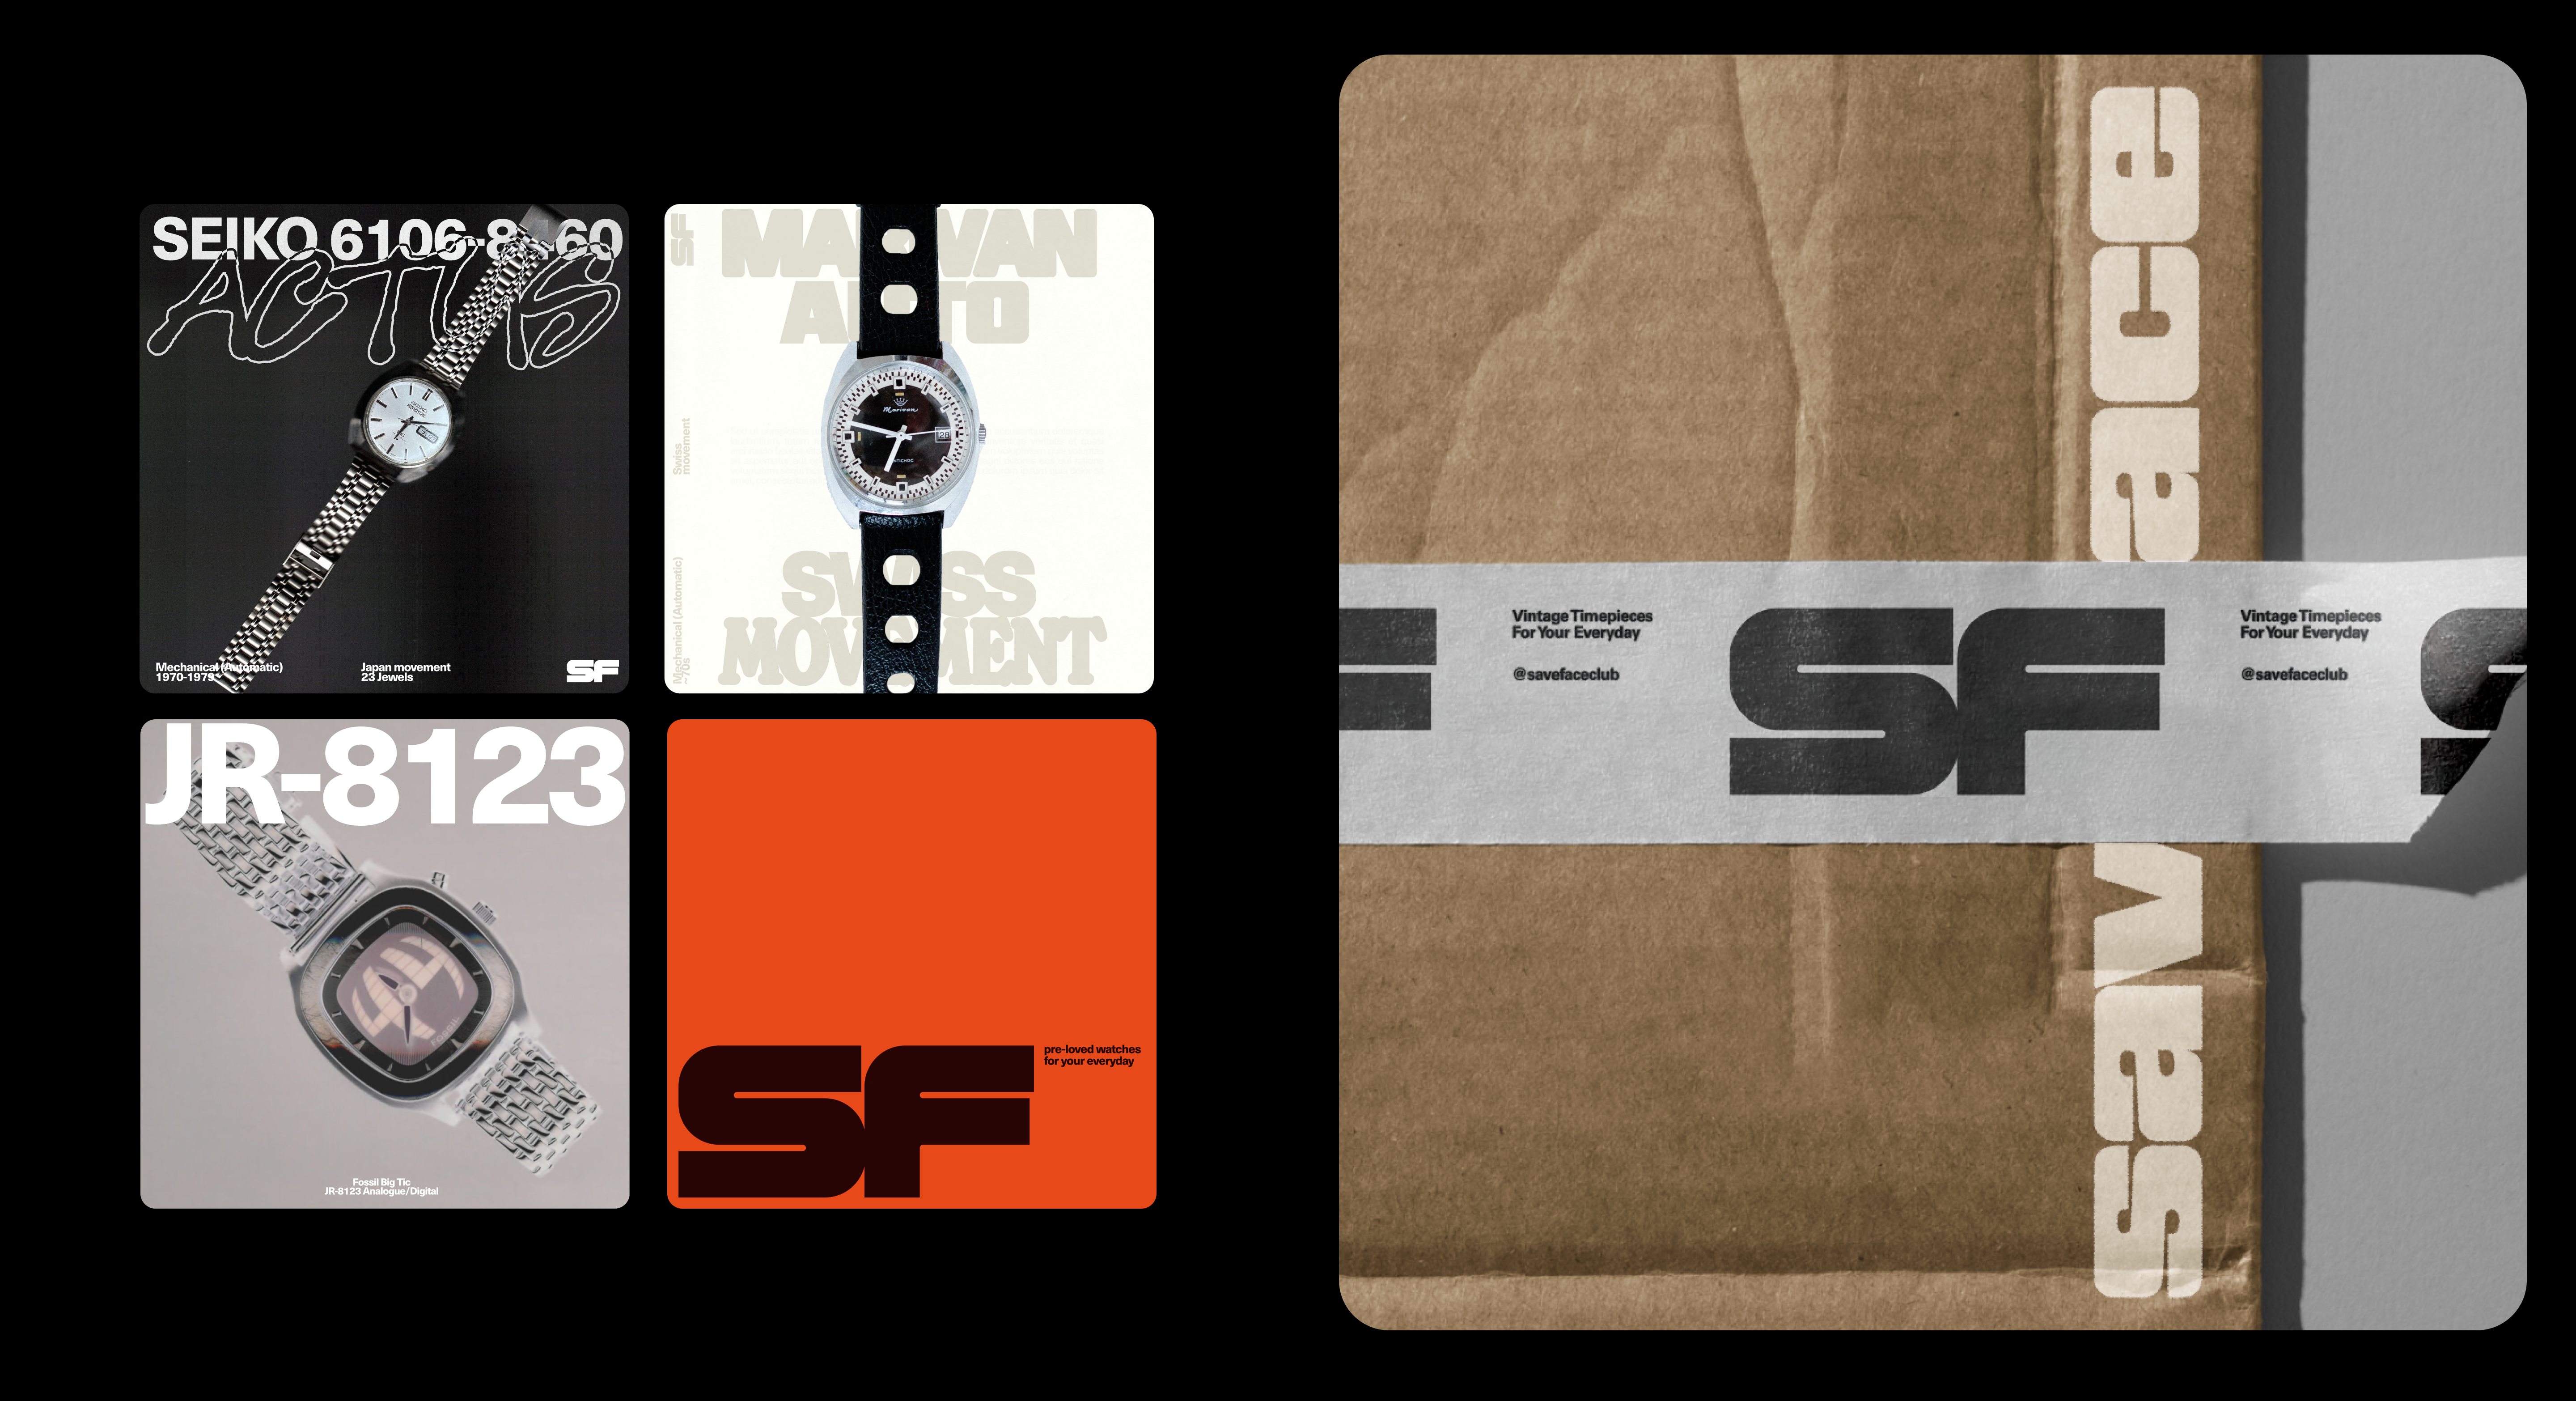 saveface socials and mailer packaging by After Hours